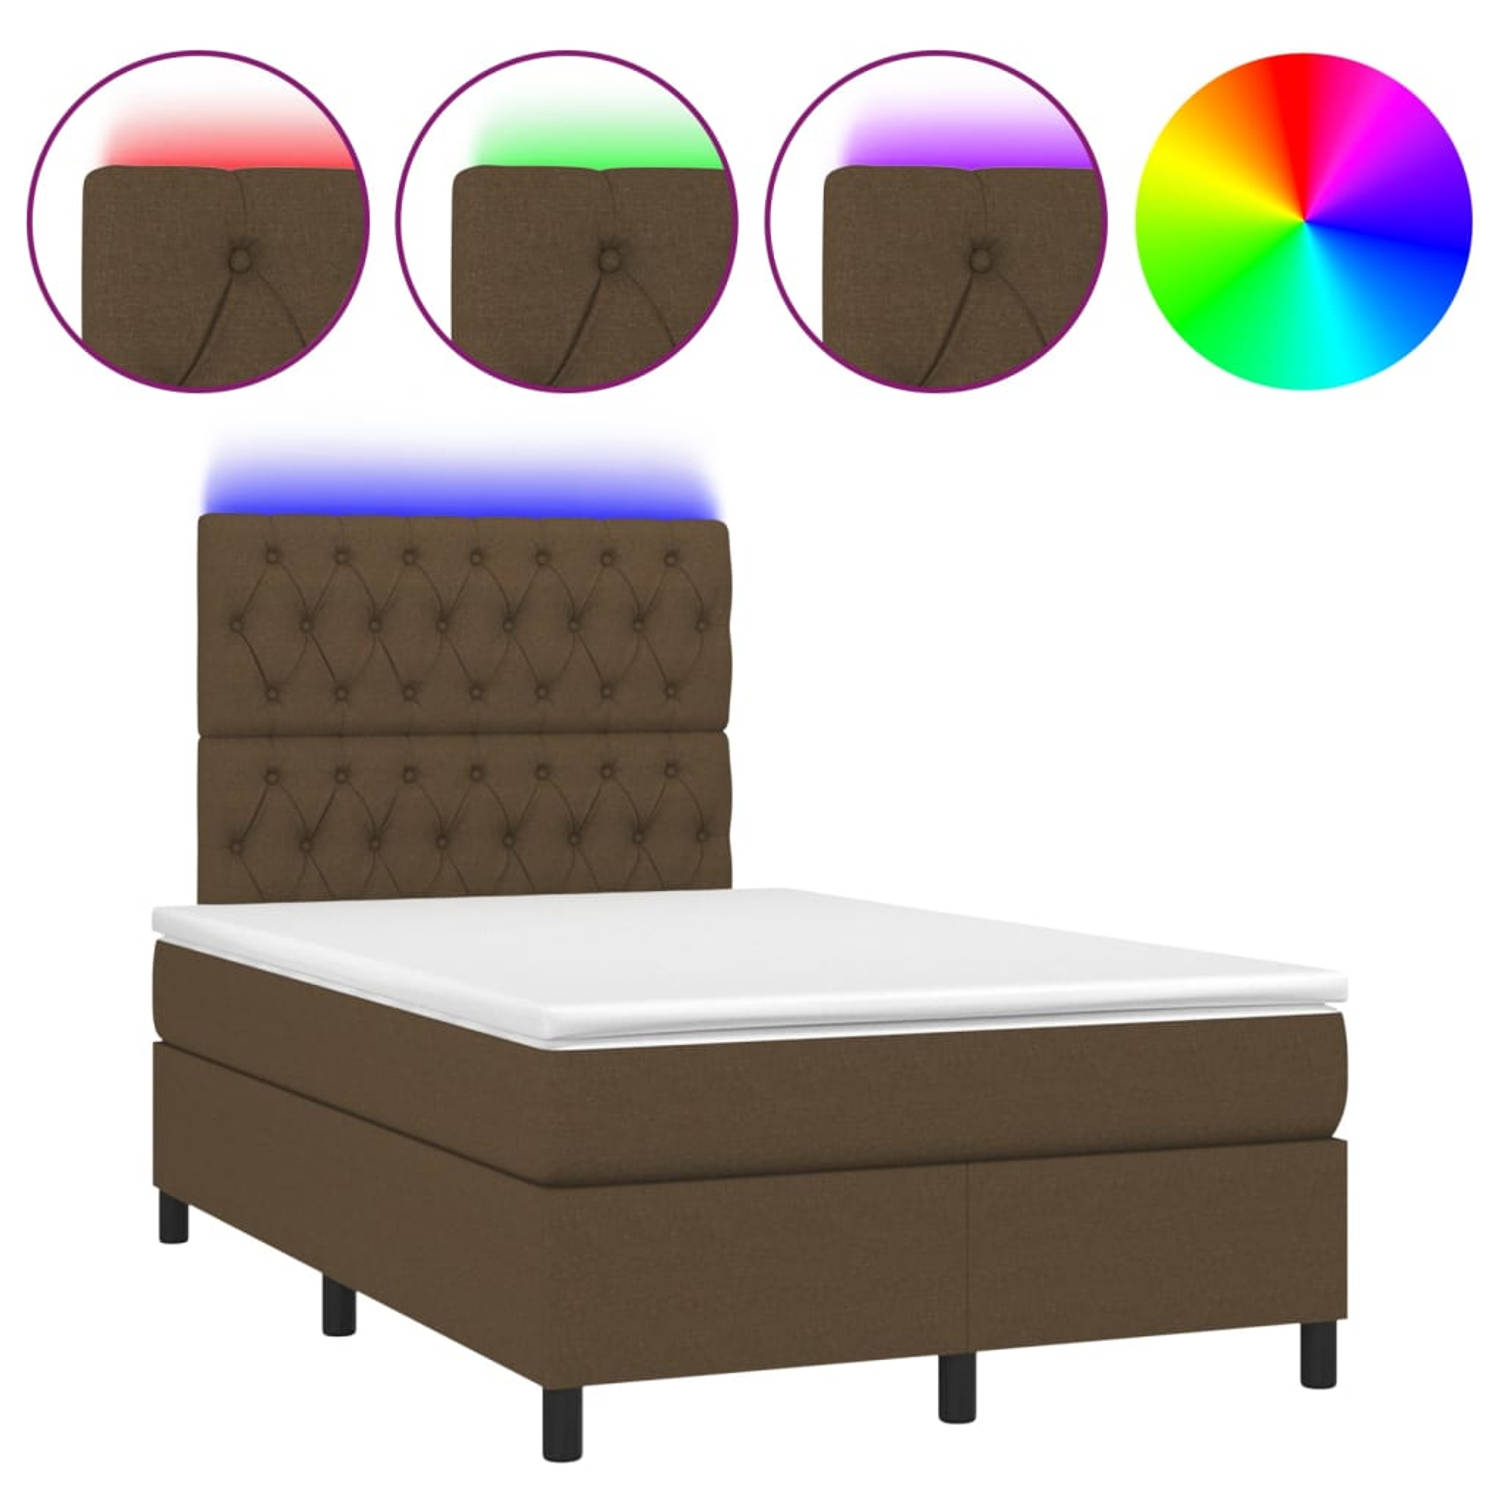 The Living Store Boxspring Dark Brown - 203 x 120 x 118/128 cm - Adjustable Headboard - LED Lights - Pocket Spring Mattress - Skin-friendly Topper - USB Connection - Assembly Guide